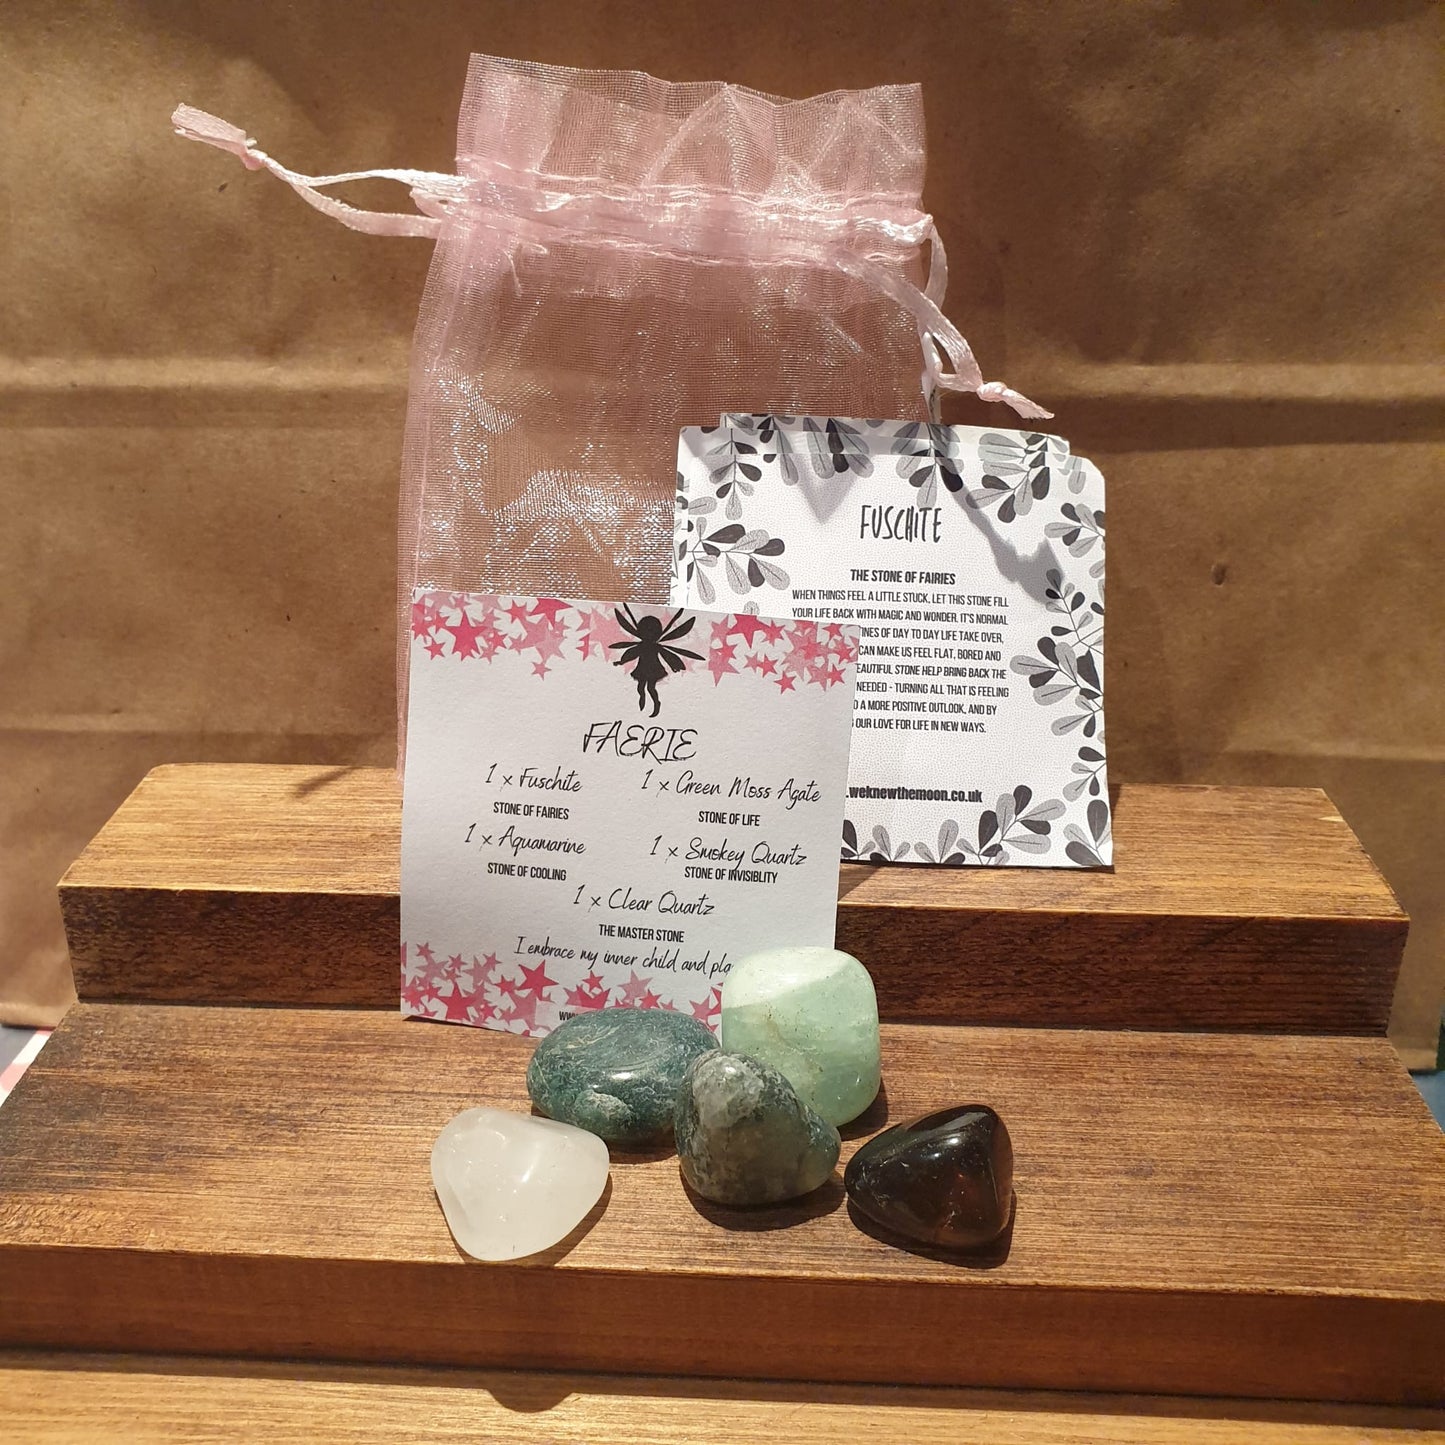 Faerie Crystal Stone Set - CSTS6 - The Hare and the Moon